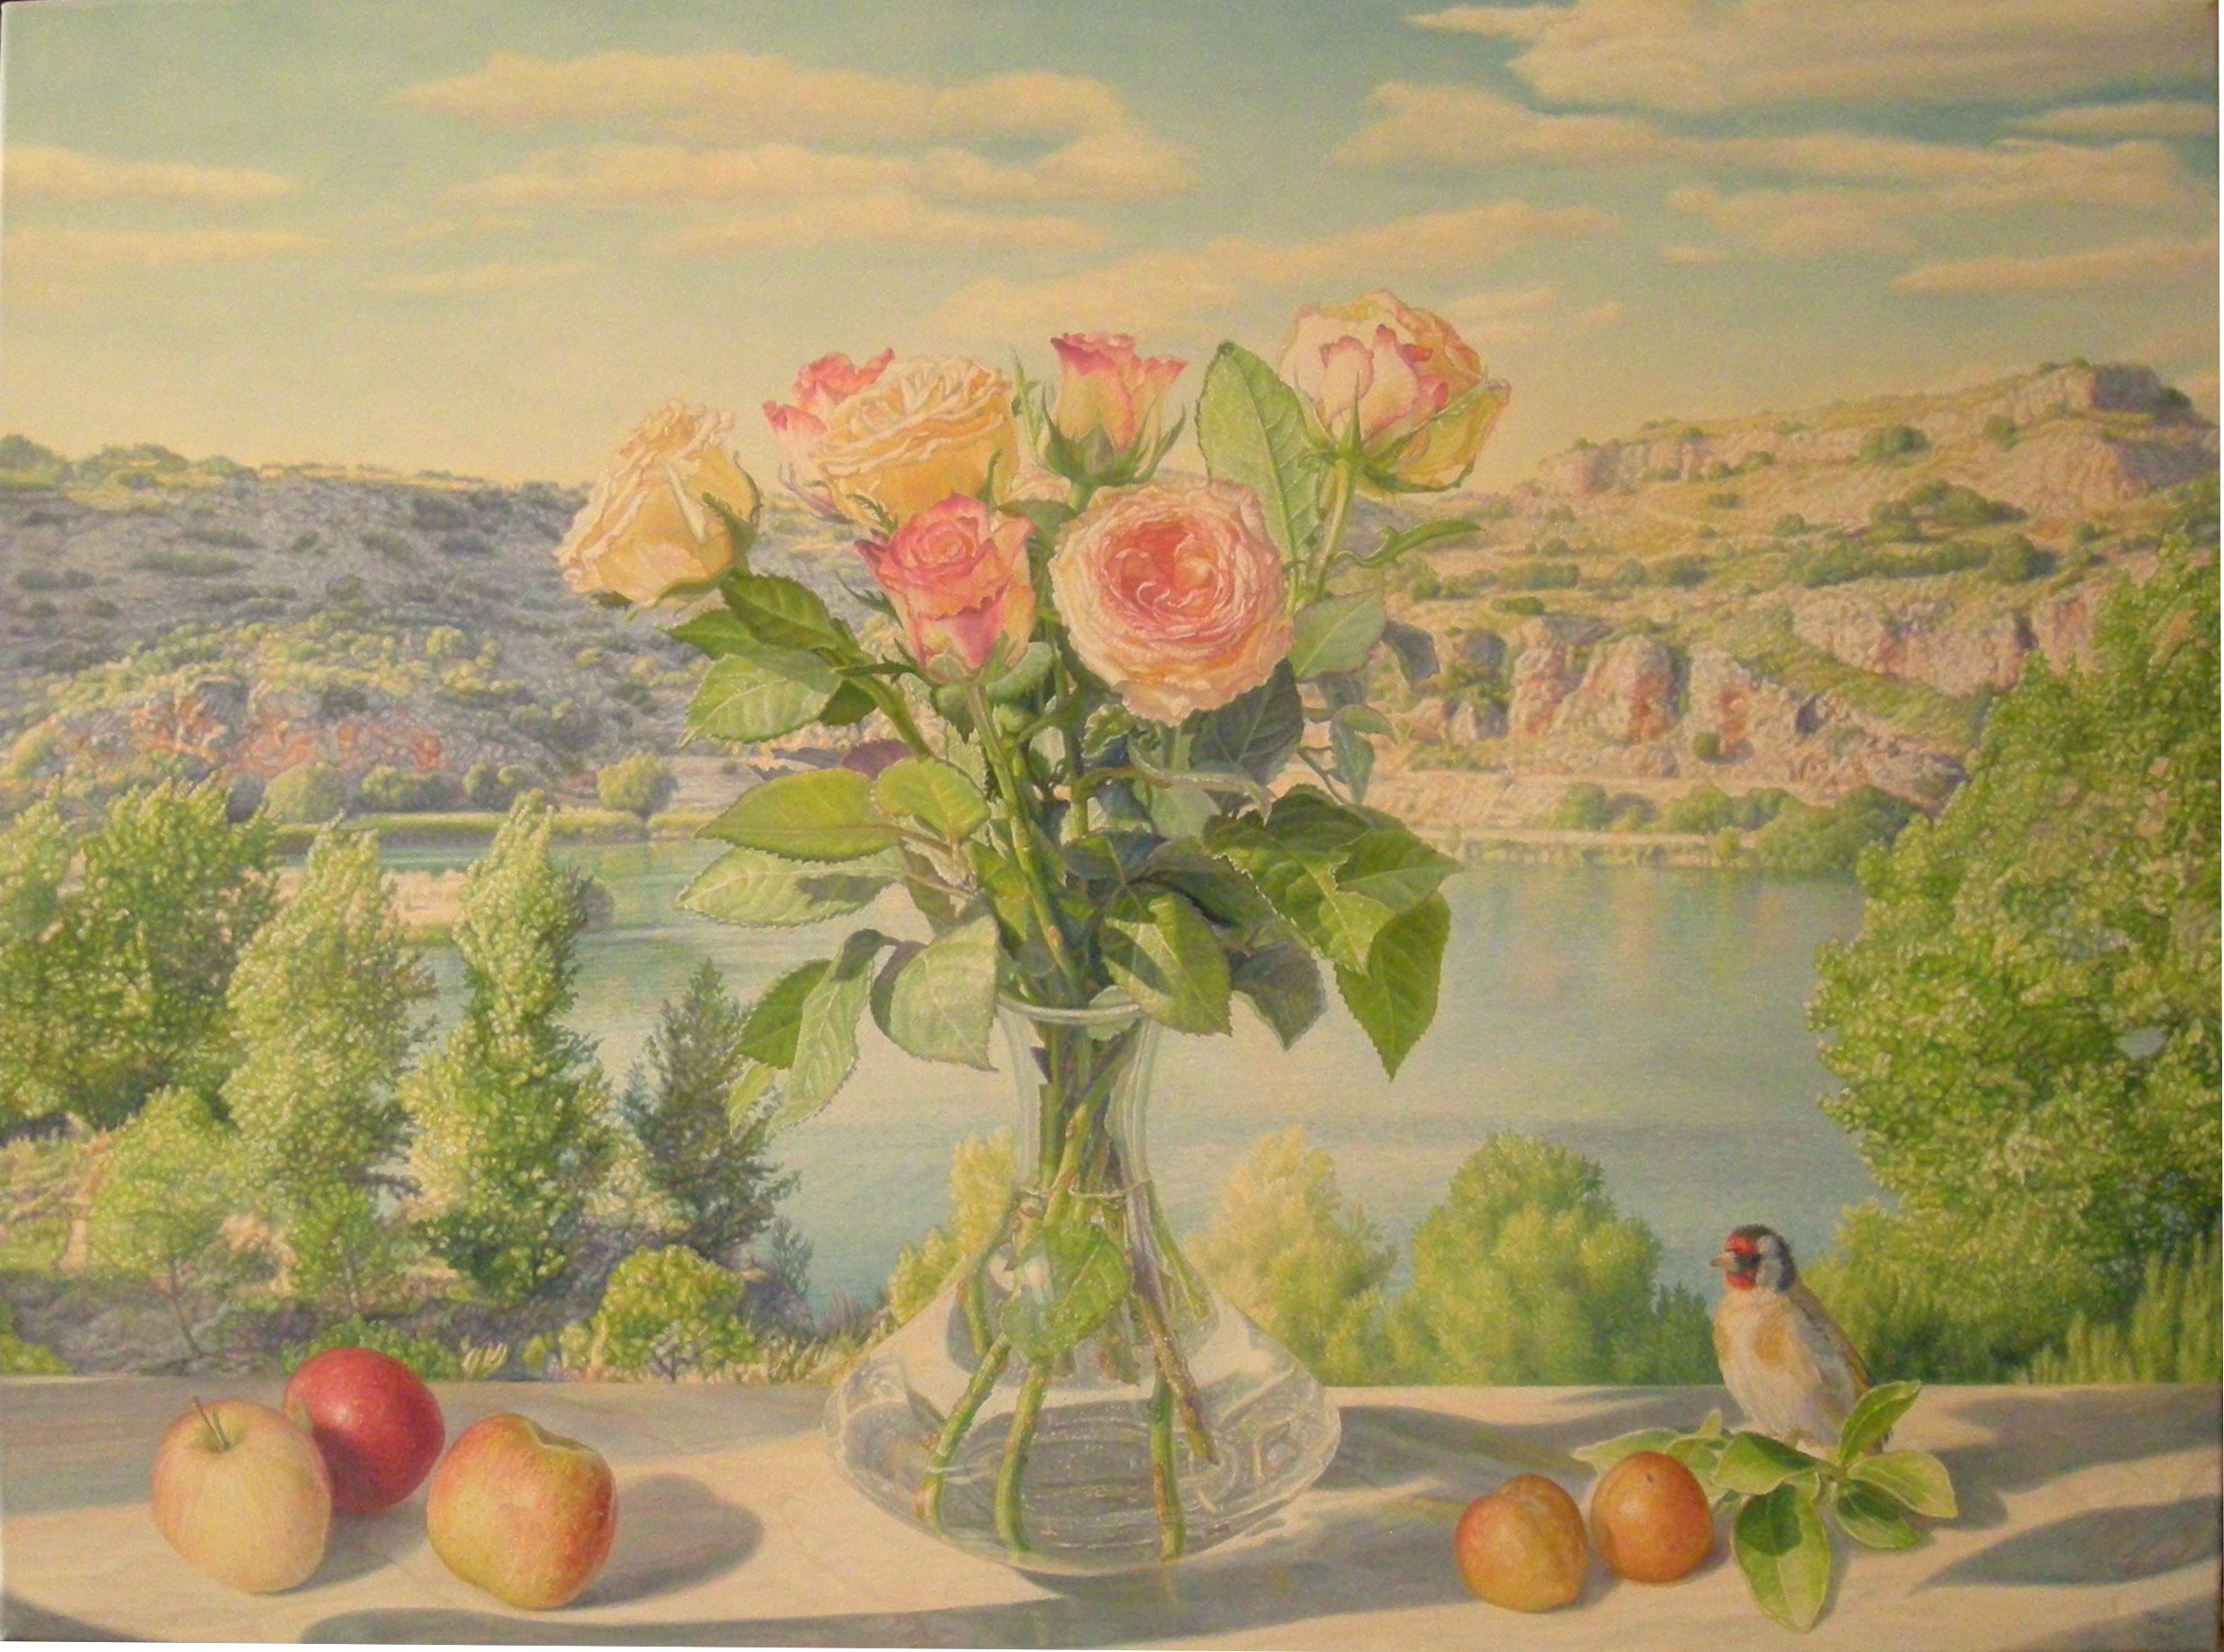 Roses and apples by the lake, 2014 | oil on canvas, 23.6x31.8in.